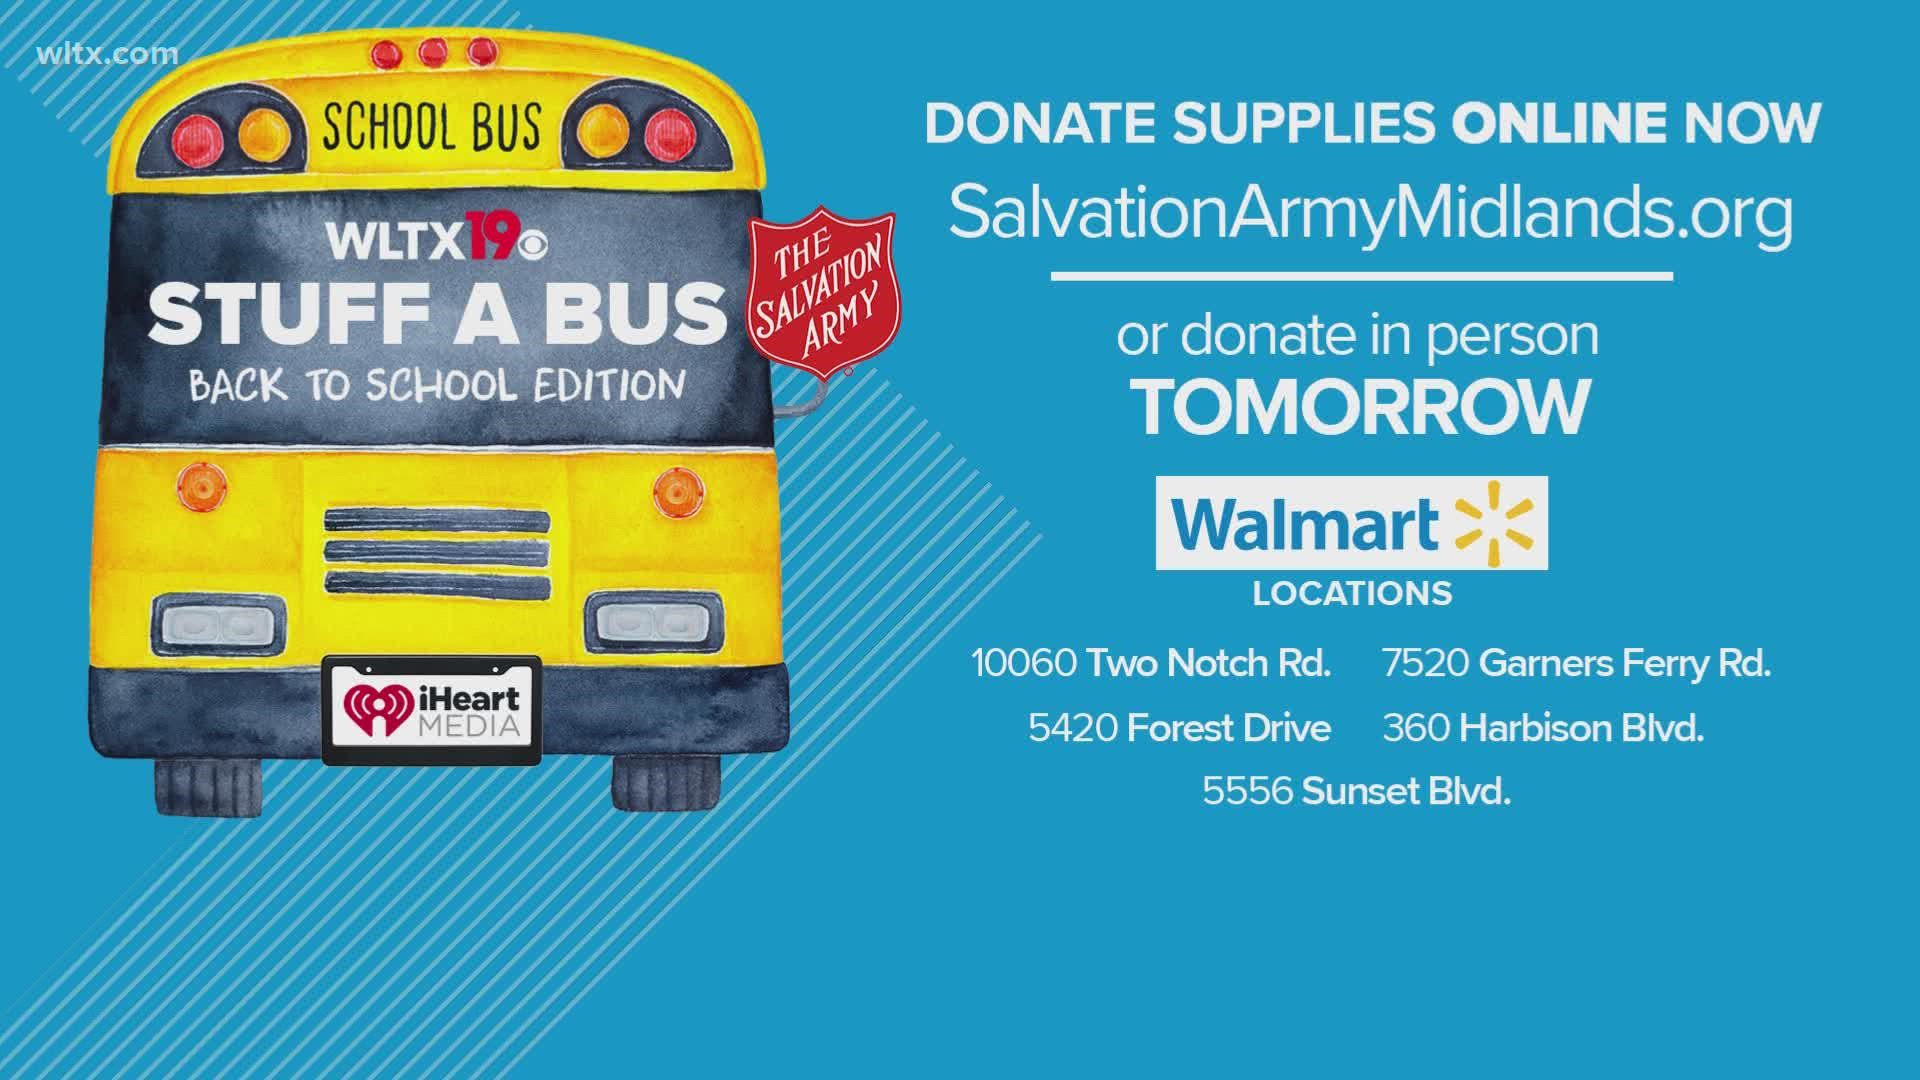 Help us stuff a bus with school supplies for Midlands kids as they head back to school.